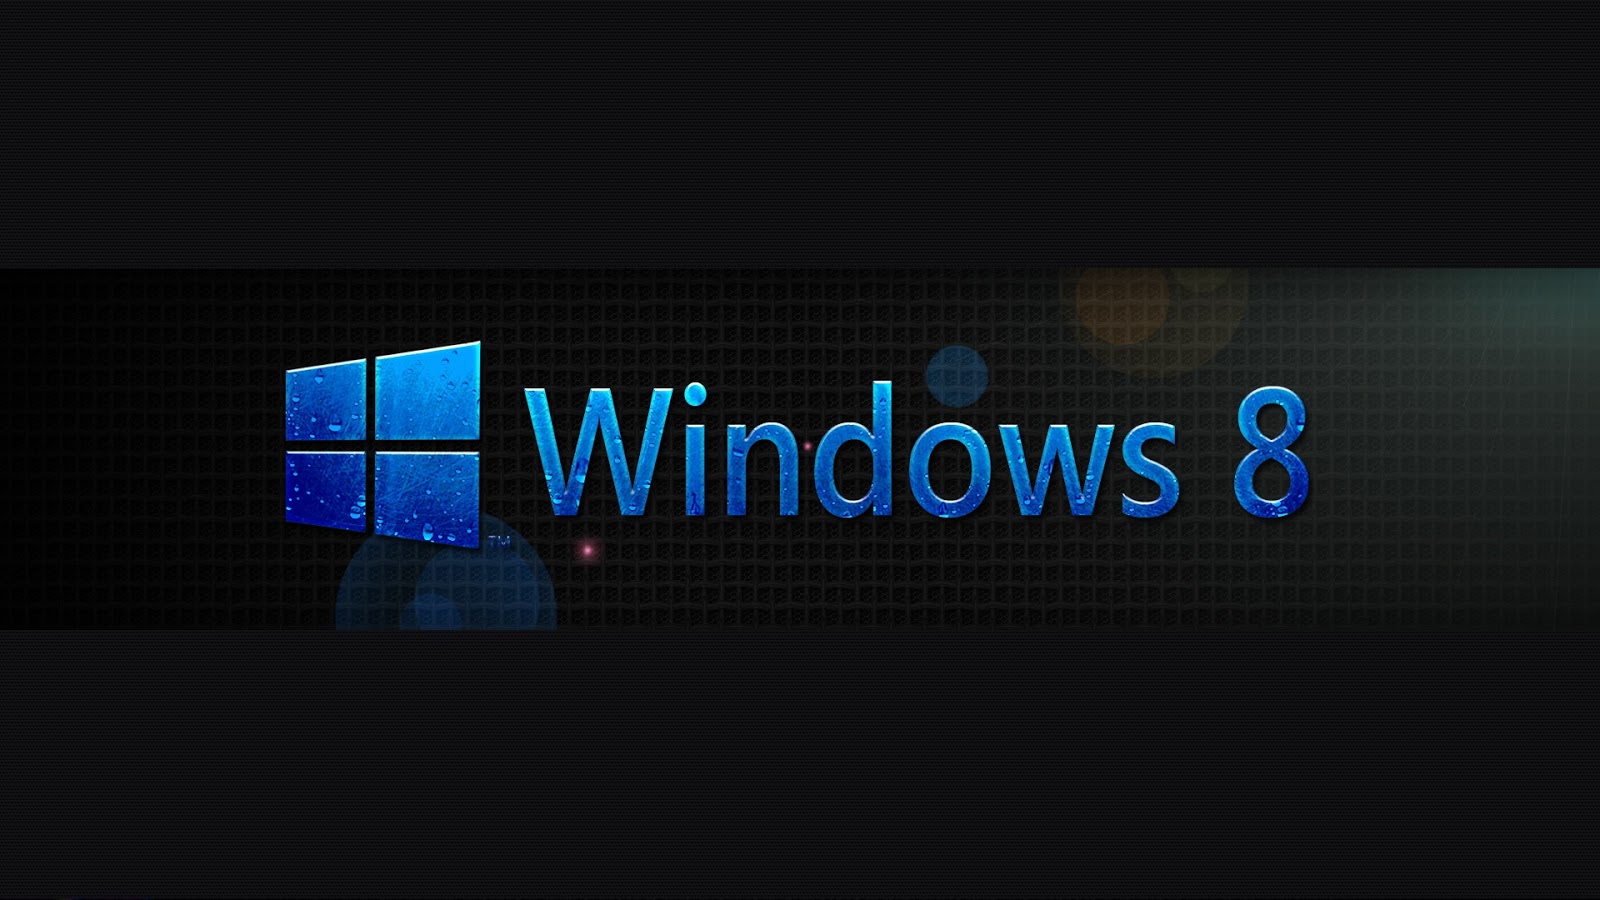 This Is Windows Wallpaper